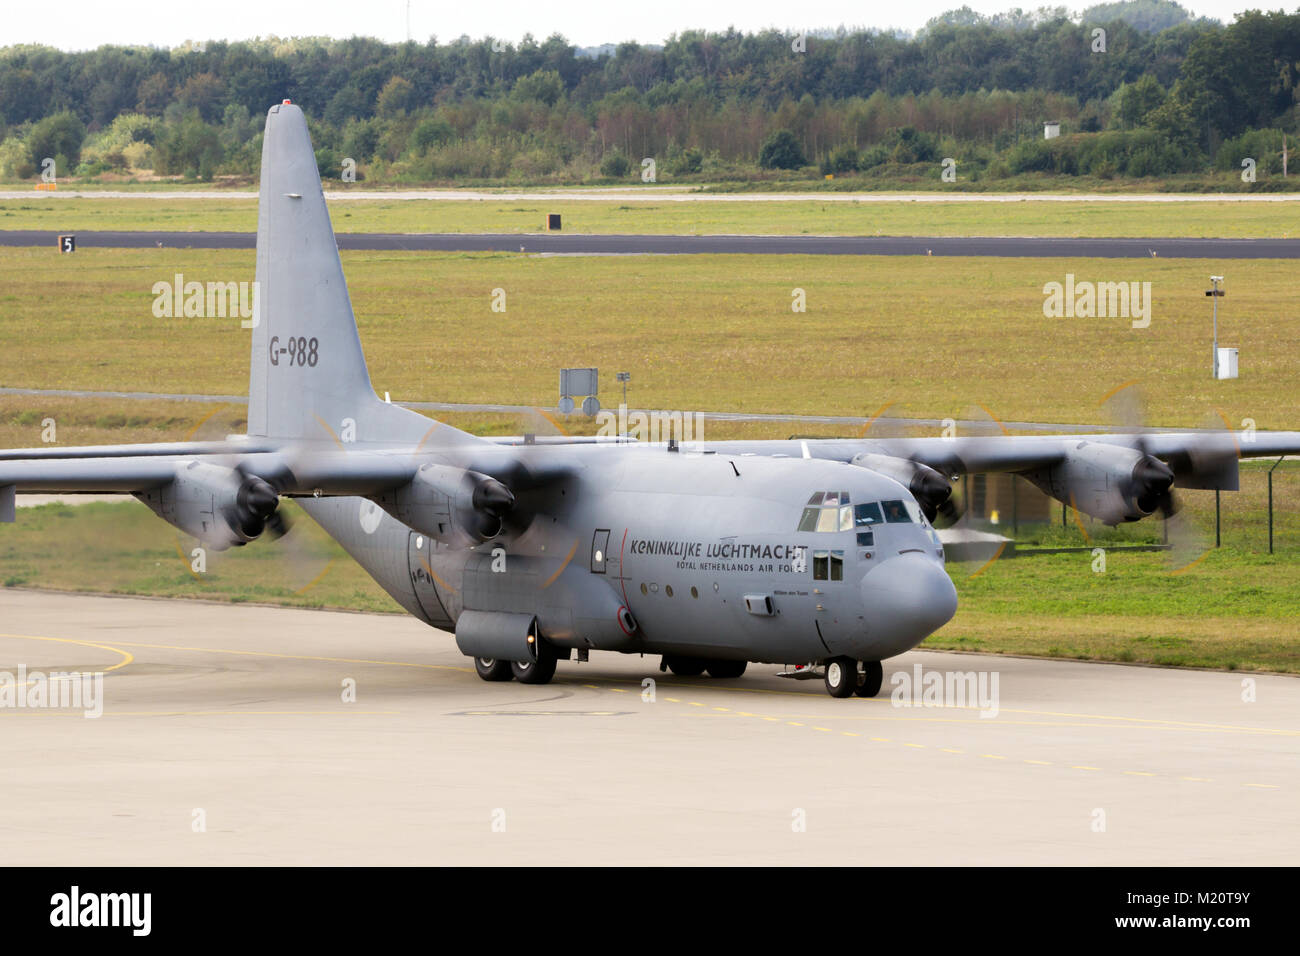 EINDHOVEN, THE NETHERLANDS - SEP 17, 2016: Royal Netherlands Air Force Lockheed C-130 Hercules cargo plane taxiing to the runway of Eindhoven Airport. Stock Photo